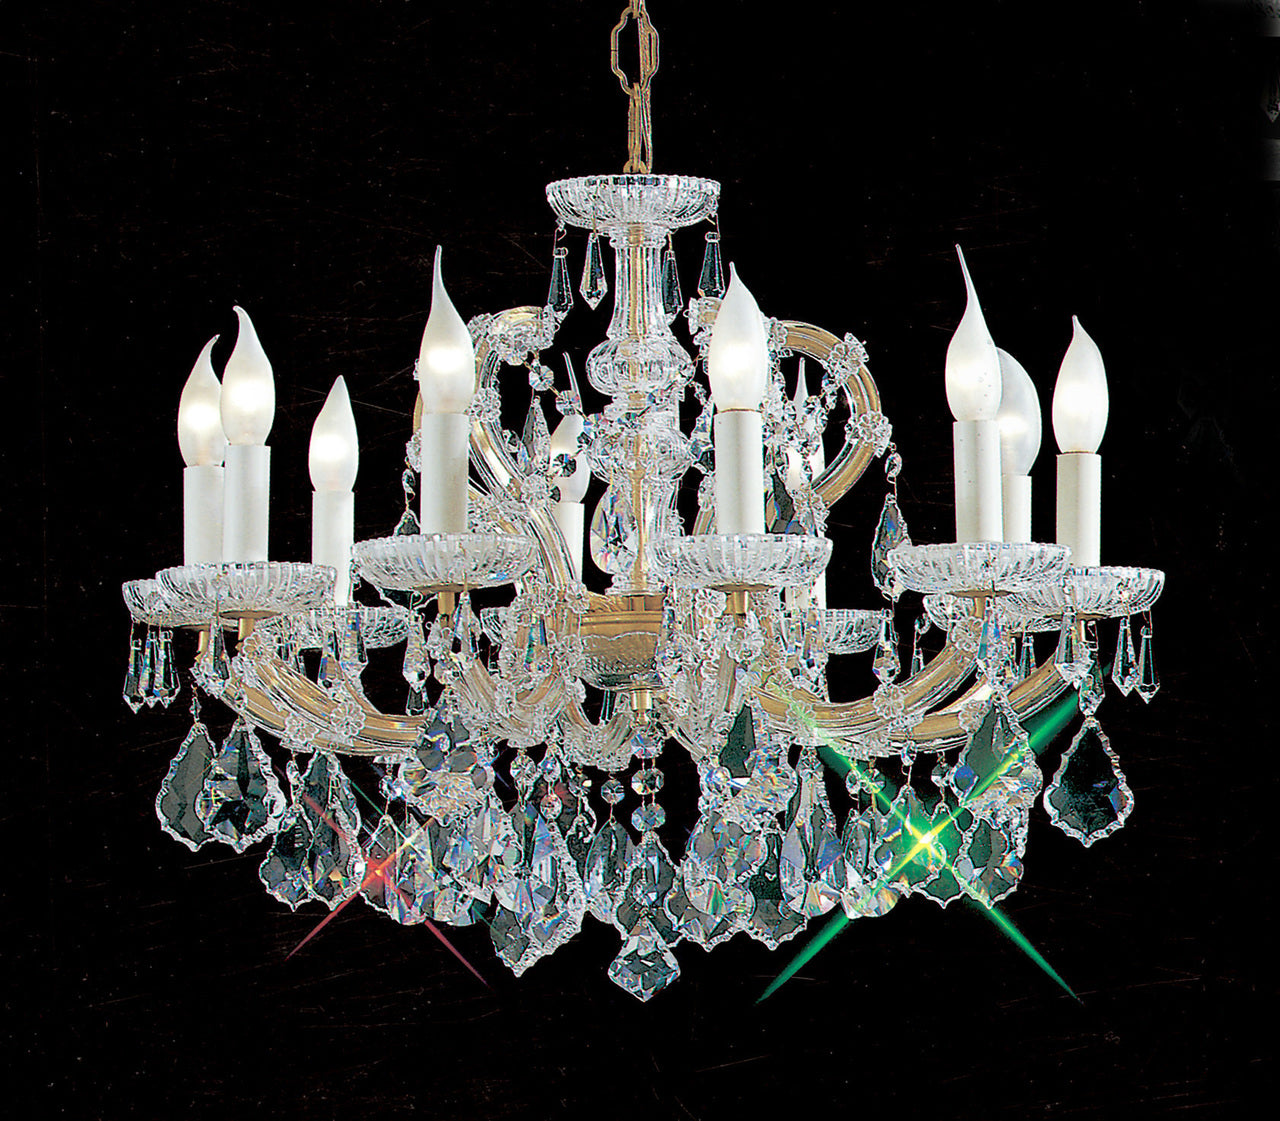 Classic Lighting 8110 OWG S Maria Theresa Traditional Crystal Chandelier in Olde World Gold (Imported from Italy)